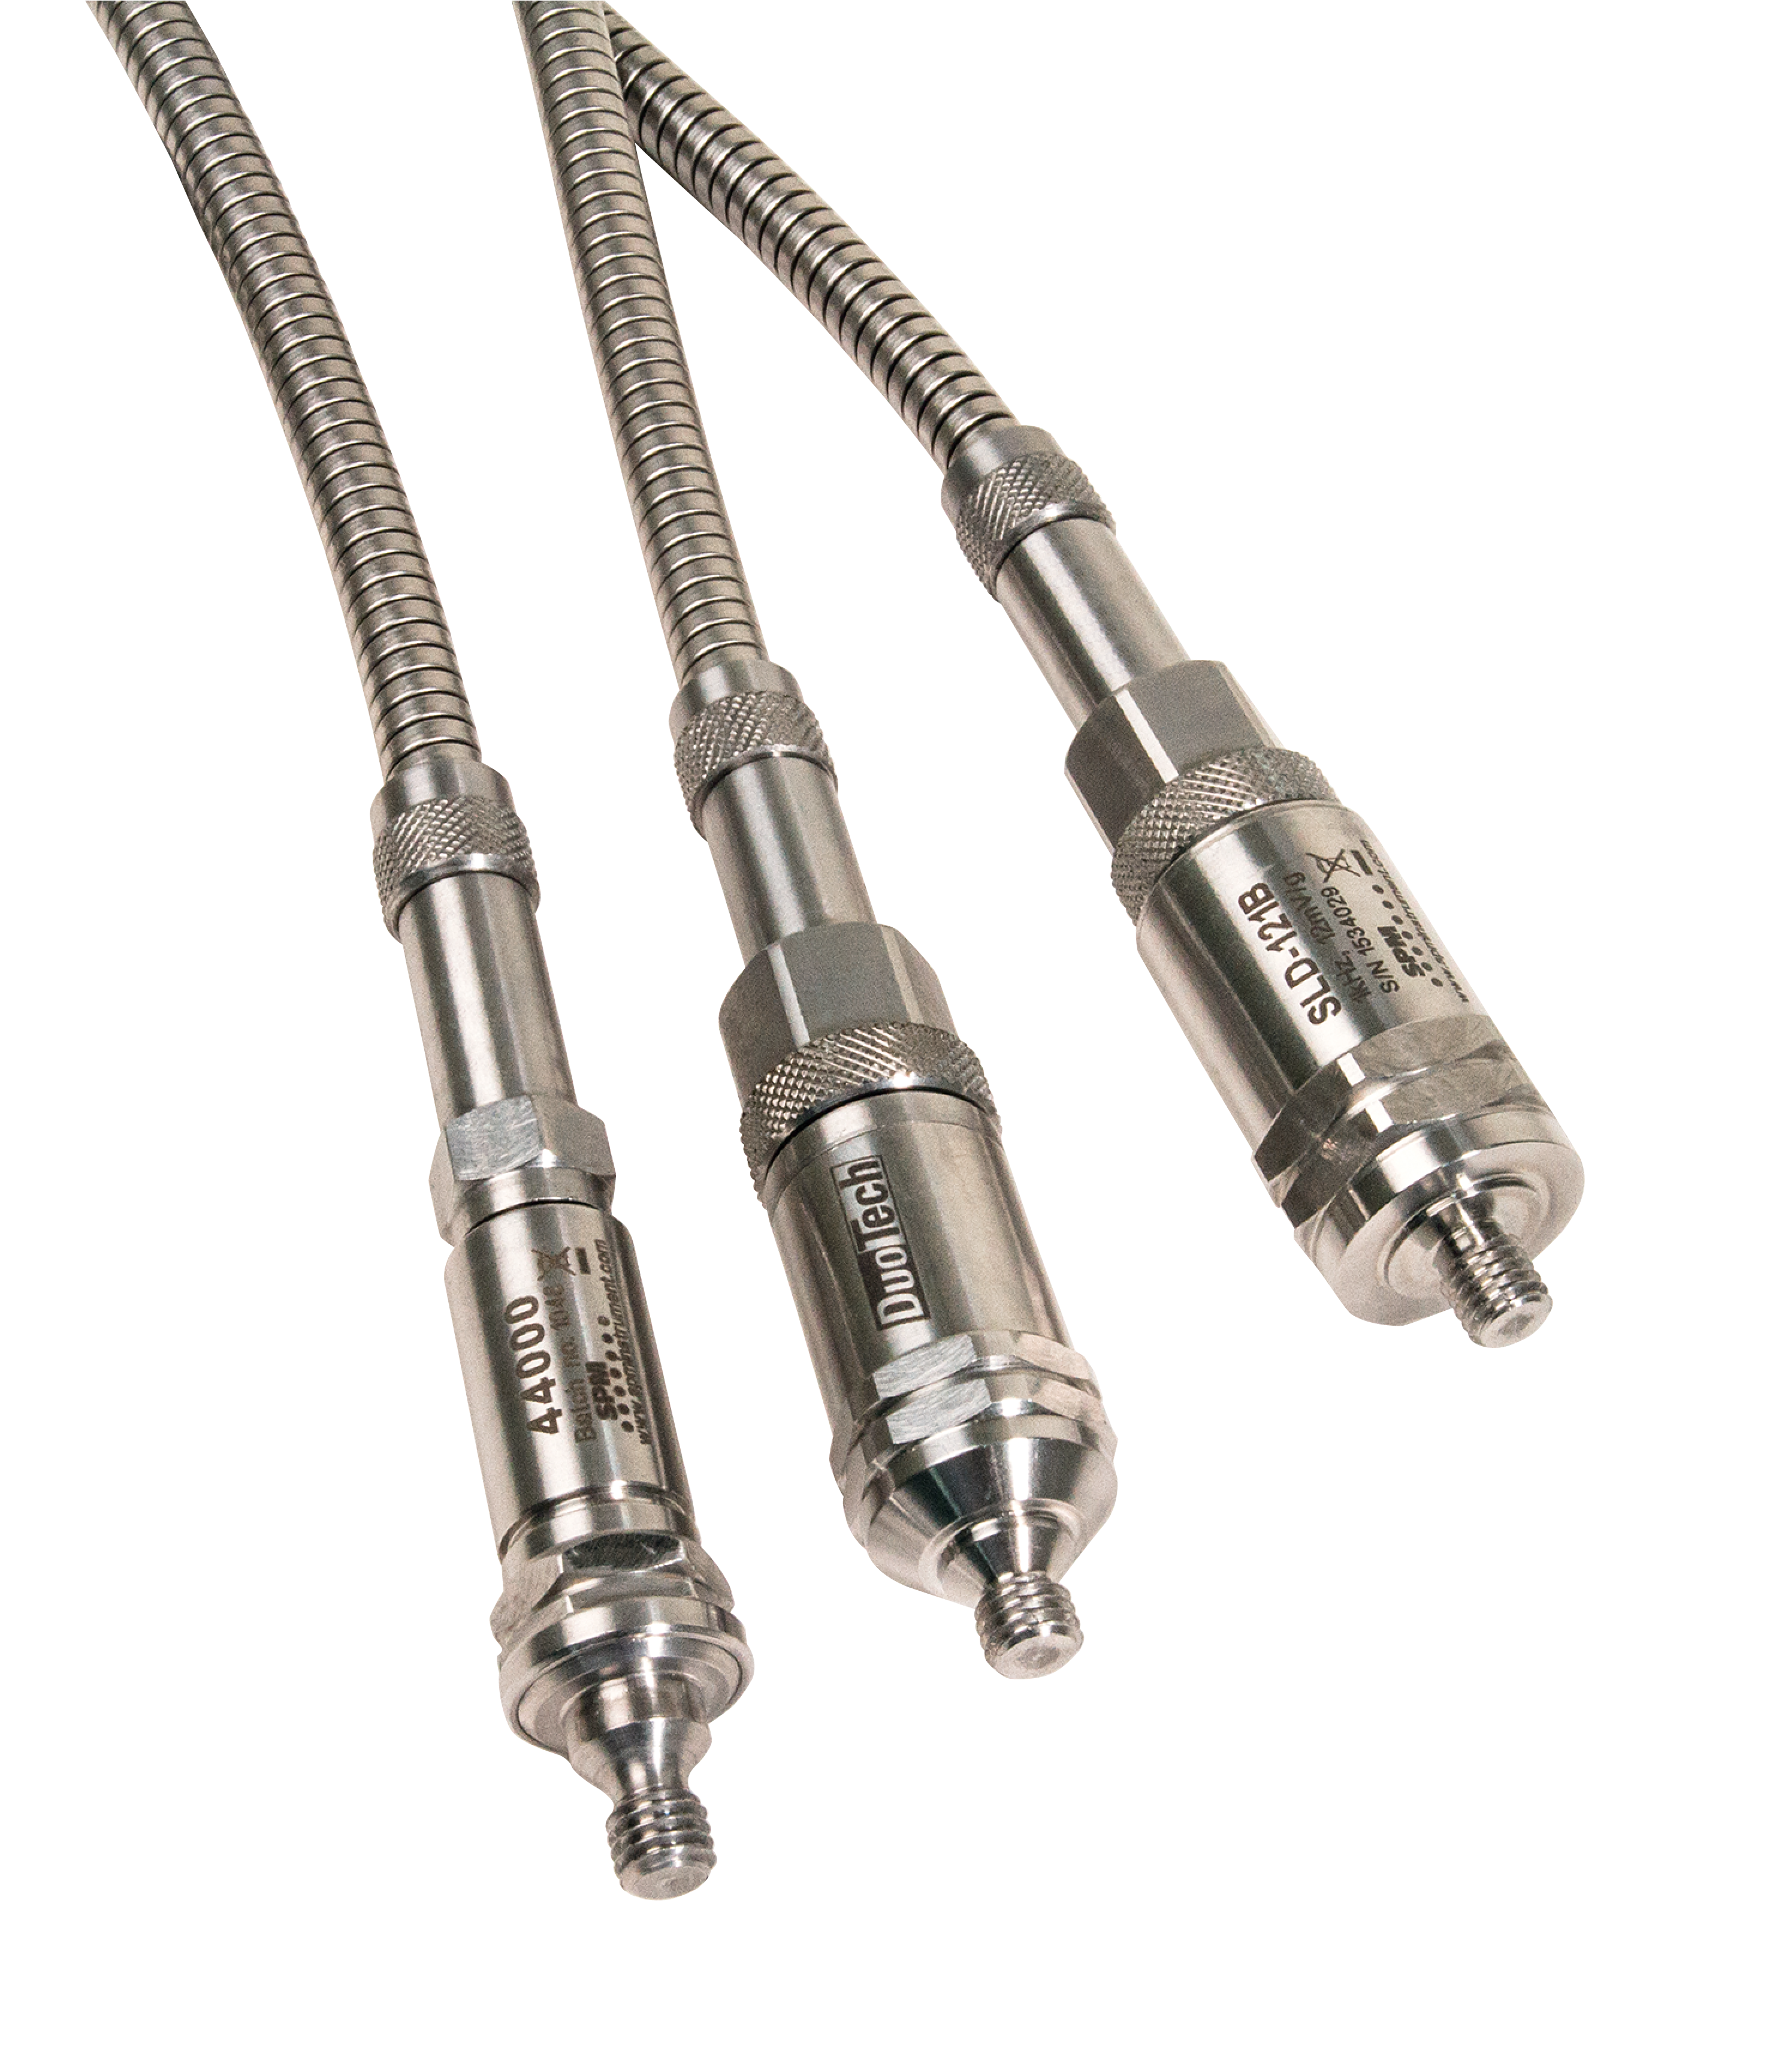 Three transducers with integrated cables